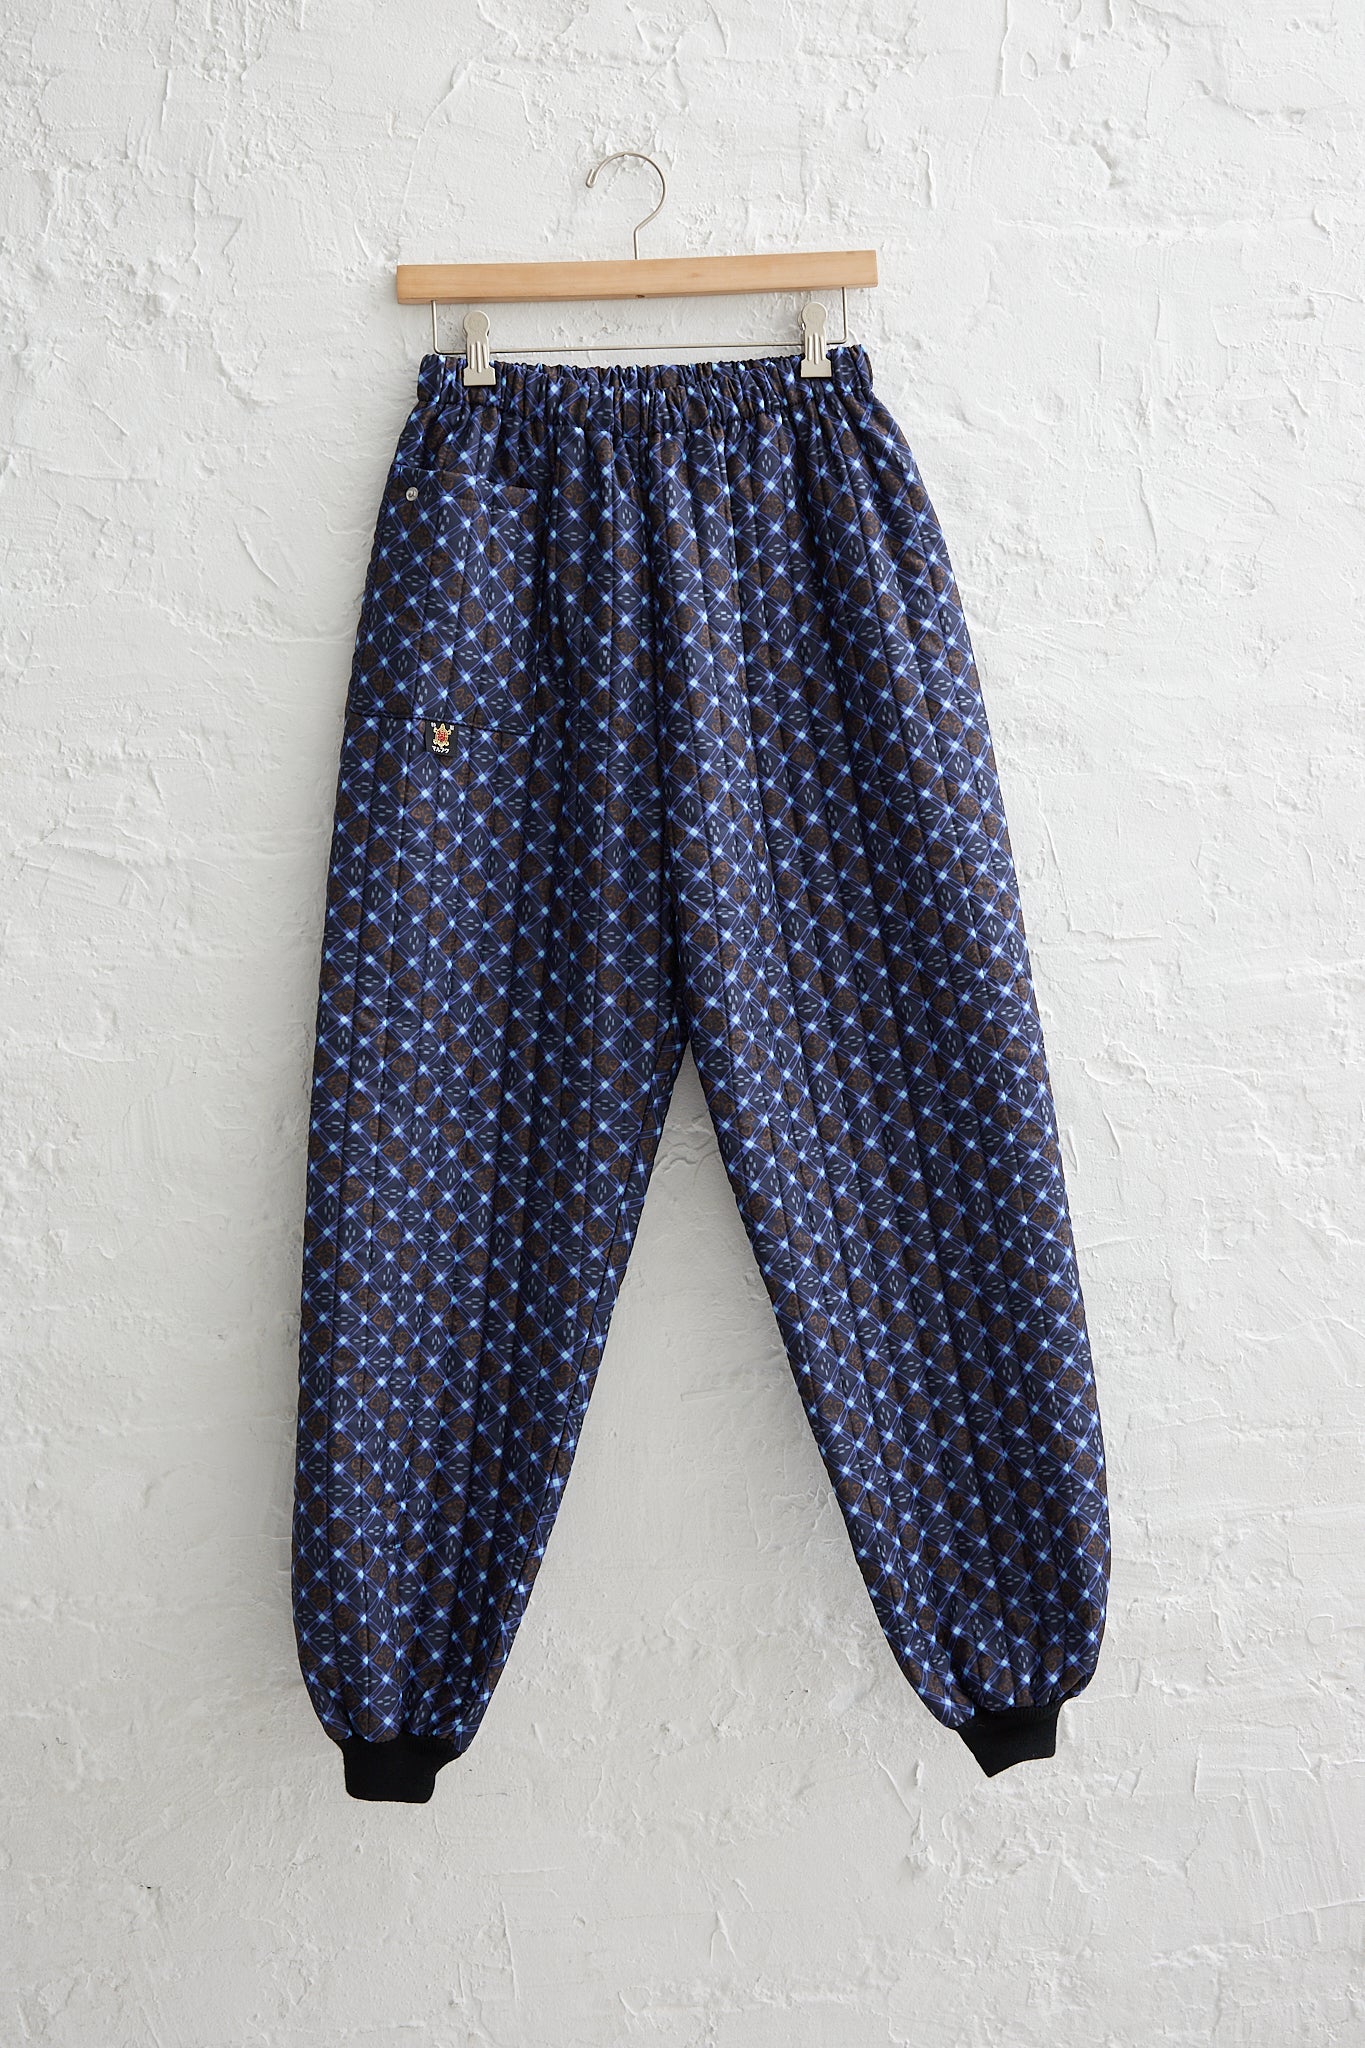 A pair of Monpe Pant No. 08 in Floral Print B - S by Bless, blue floral printed nylon jogging pants with an elasticated waist, hanging on a white wall.